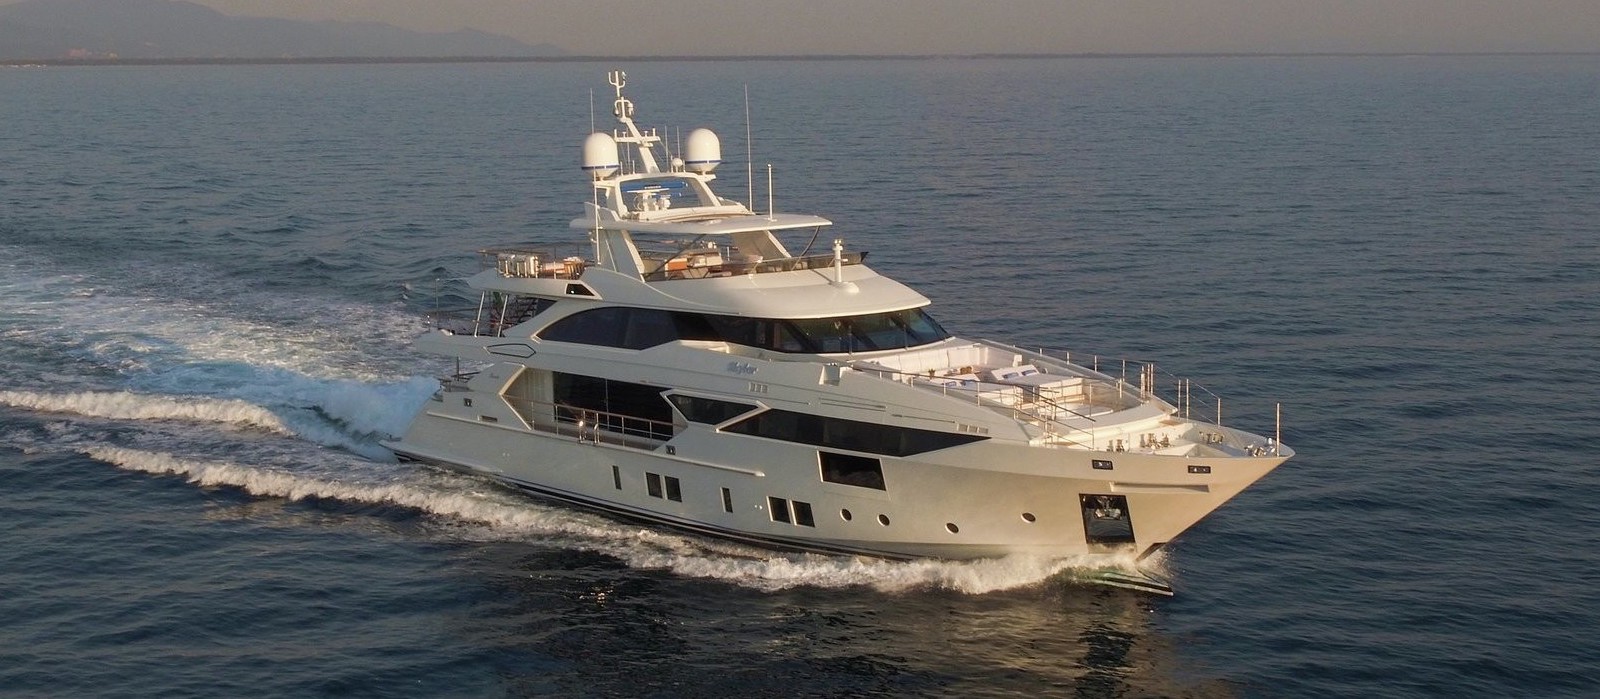 New Super Yacht Offering From Benetti